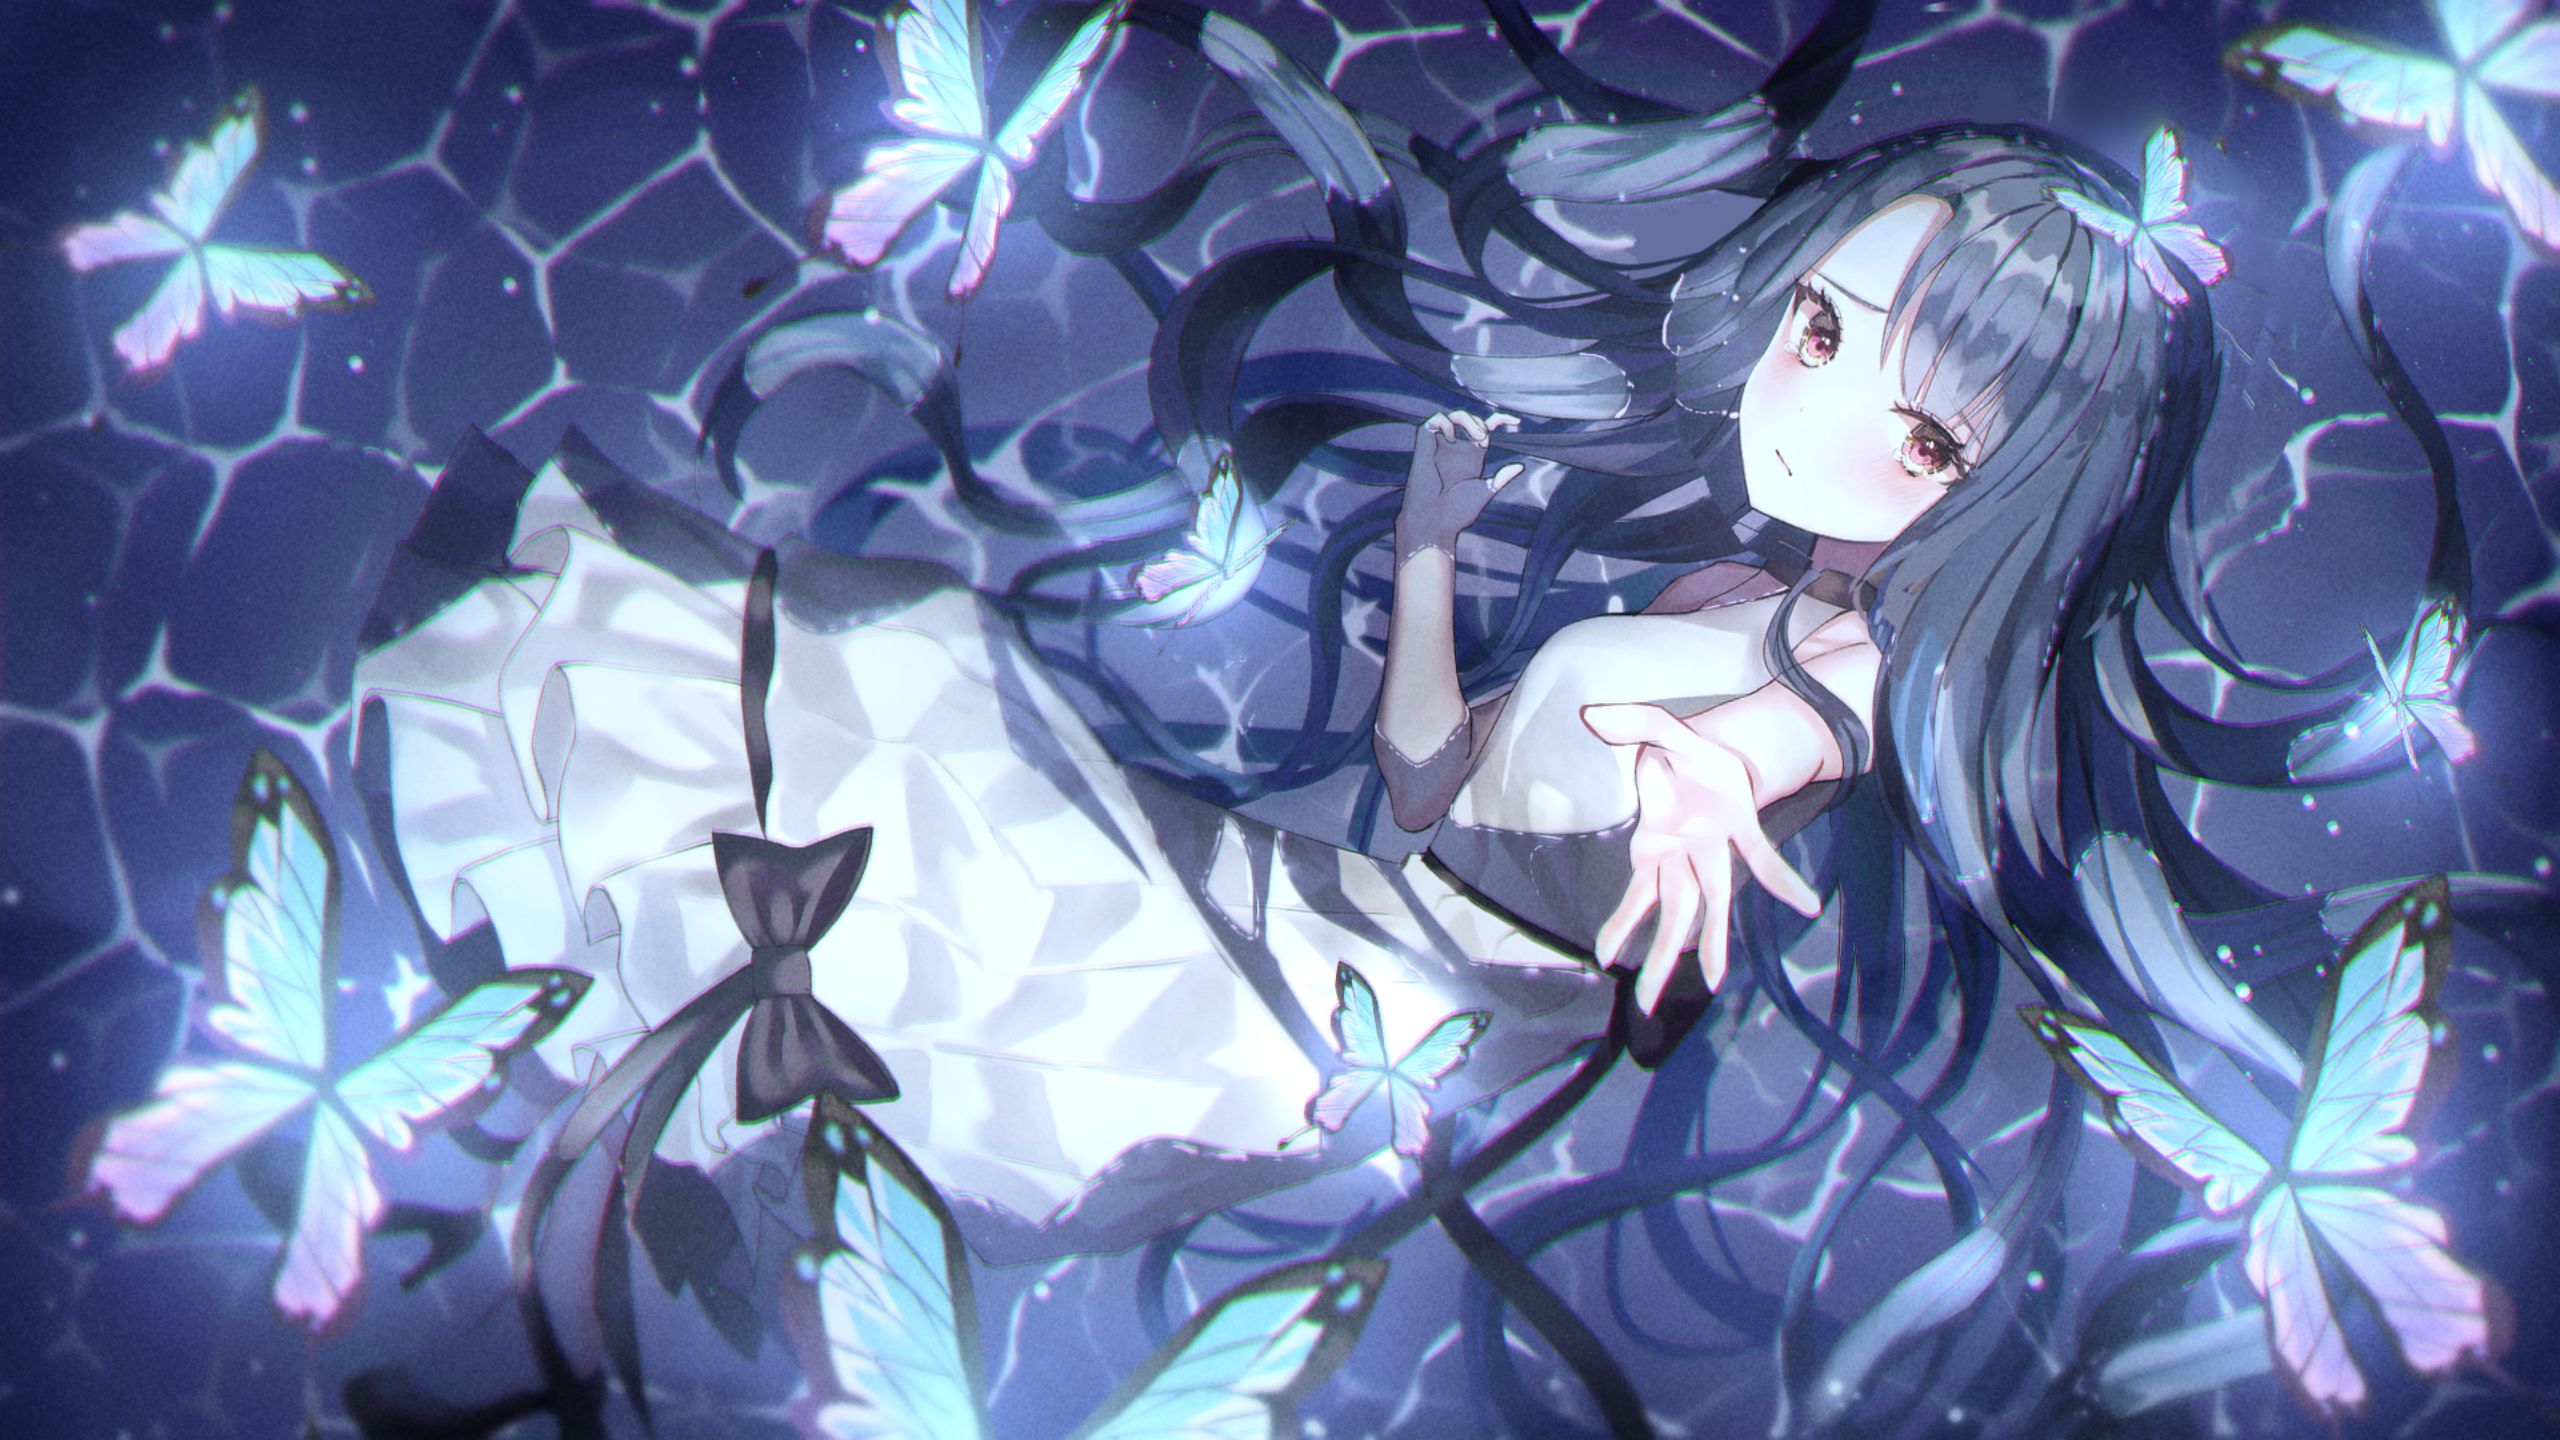 Anime 2560x1440 anime girls water butterfly arms reaching